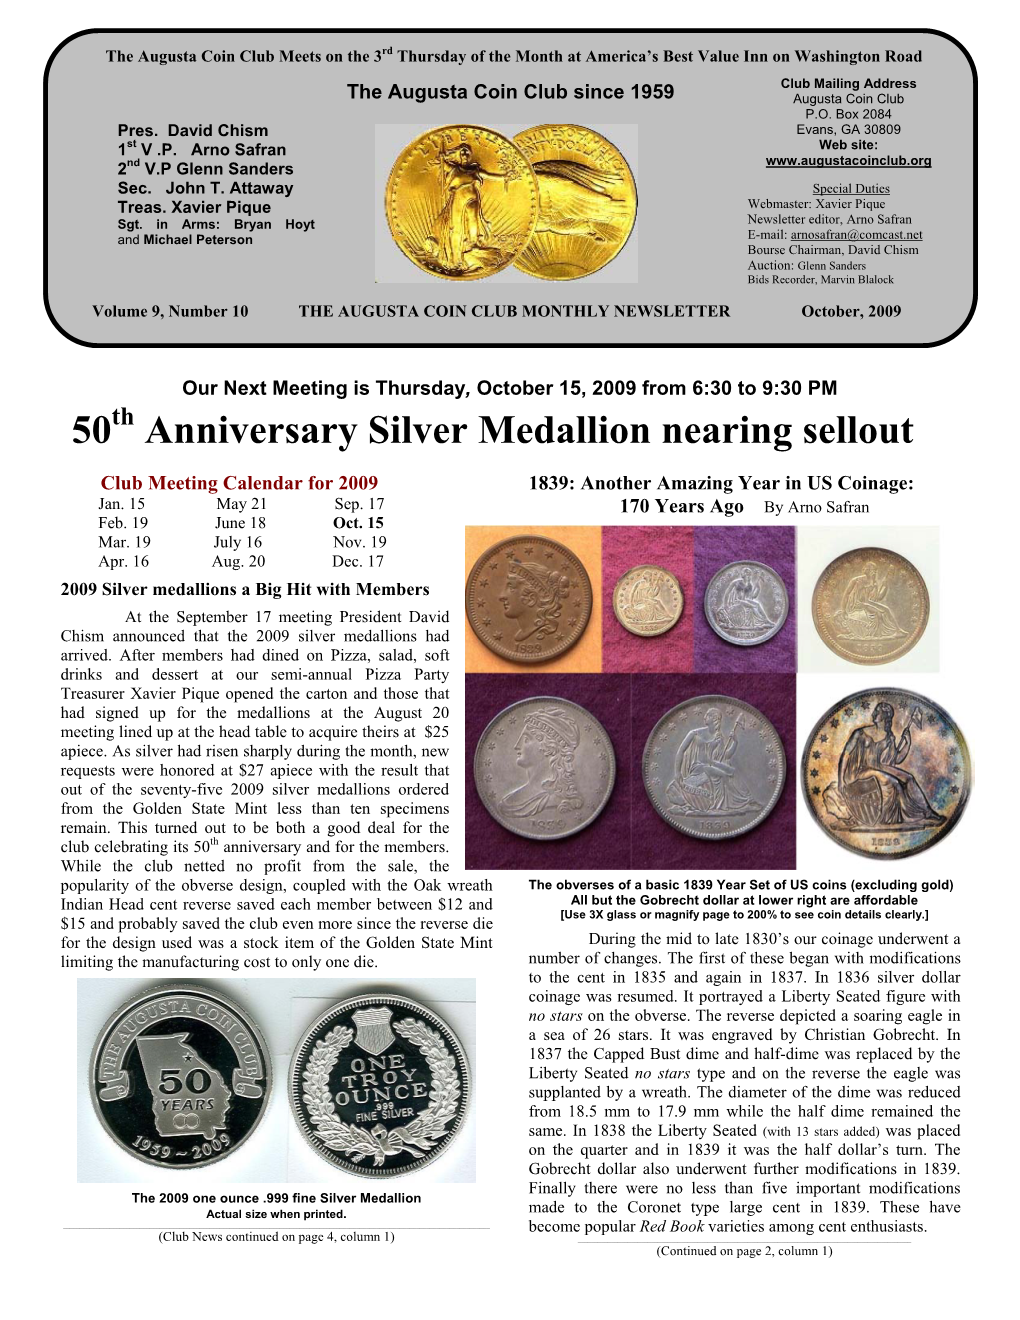 50 Anniversary Silver Medallion Nearing Sellout